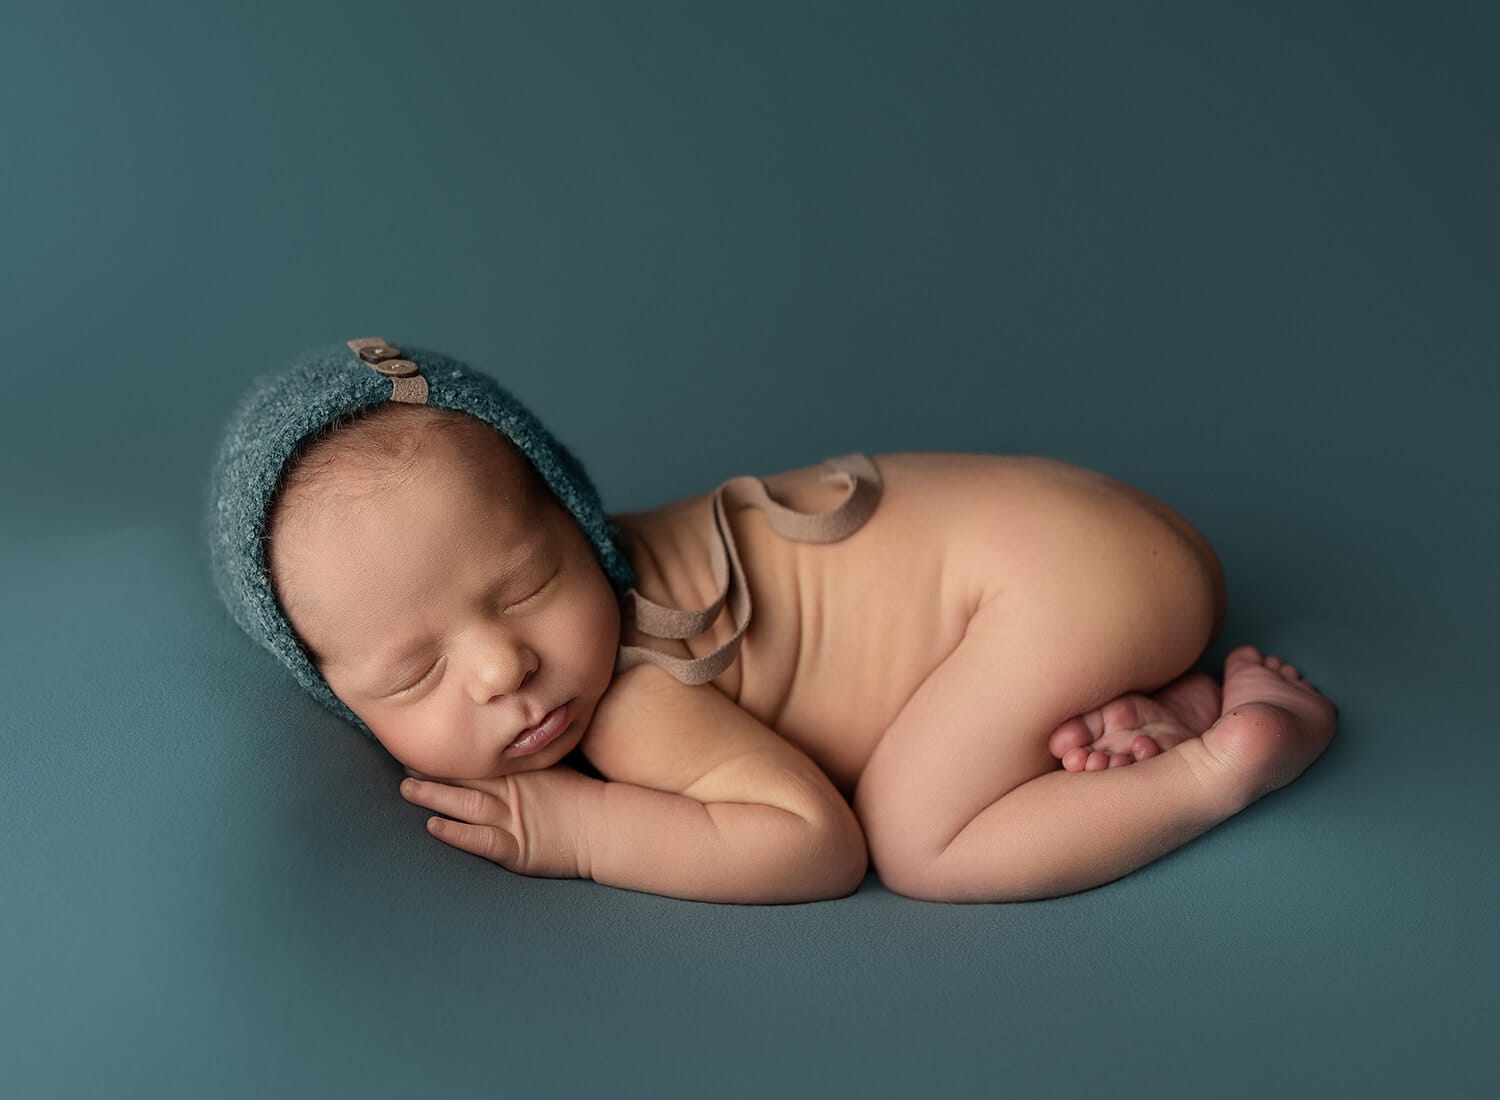 The photo shows a newborn lying on his tummy on a peacock-colored backdrop with a bonnet to match the Baton Rouge newborn photographer.